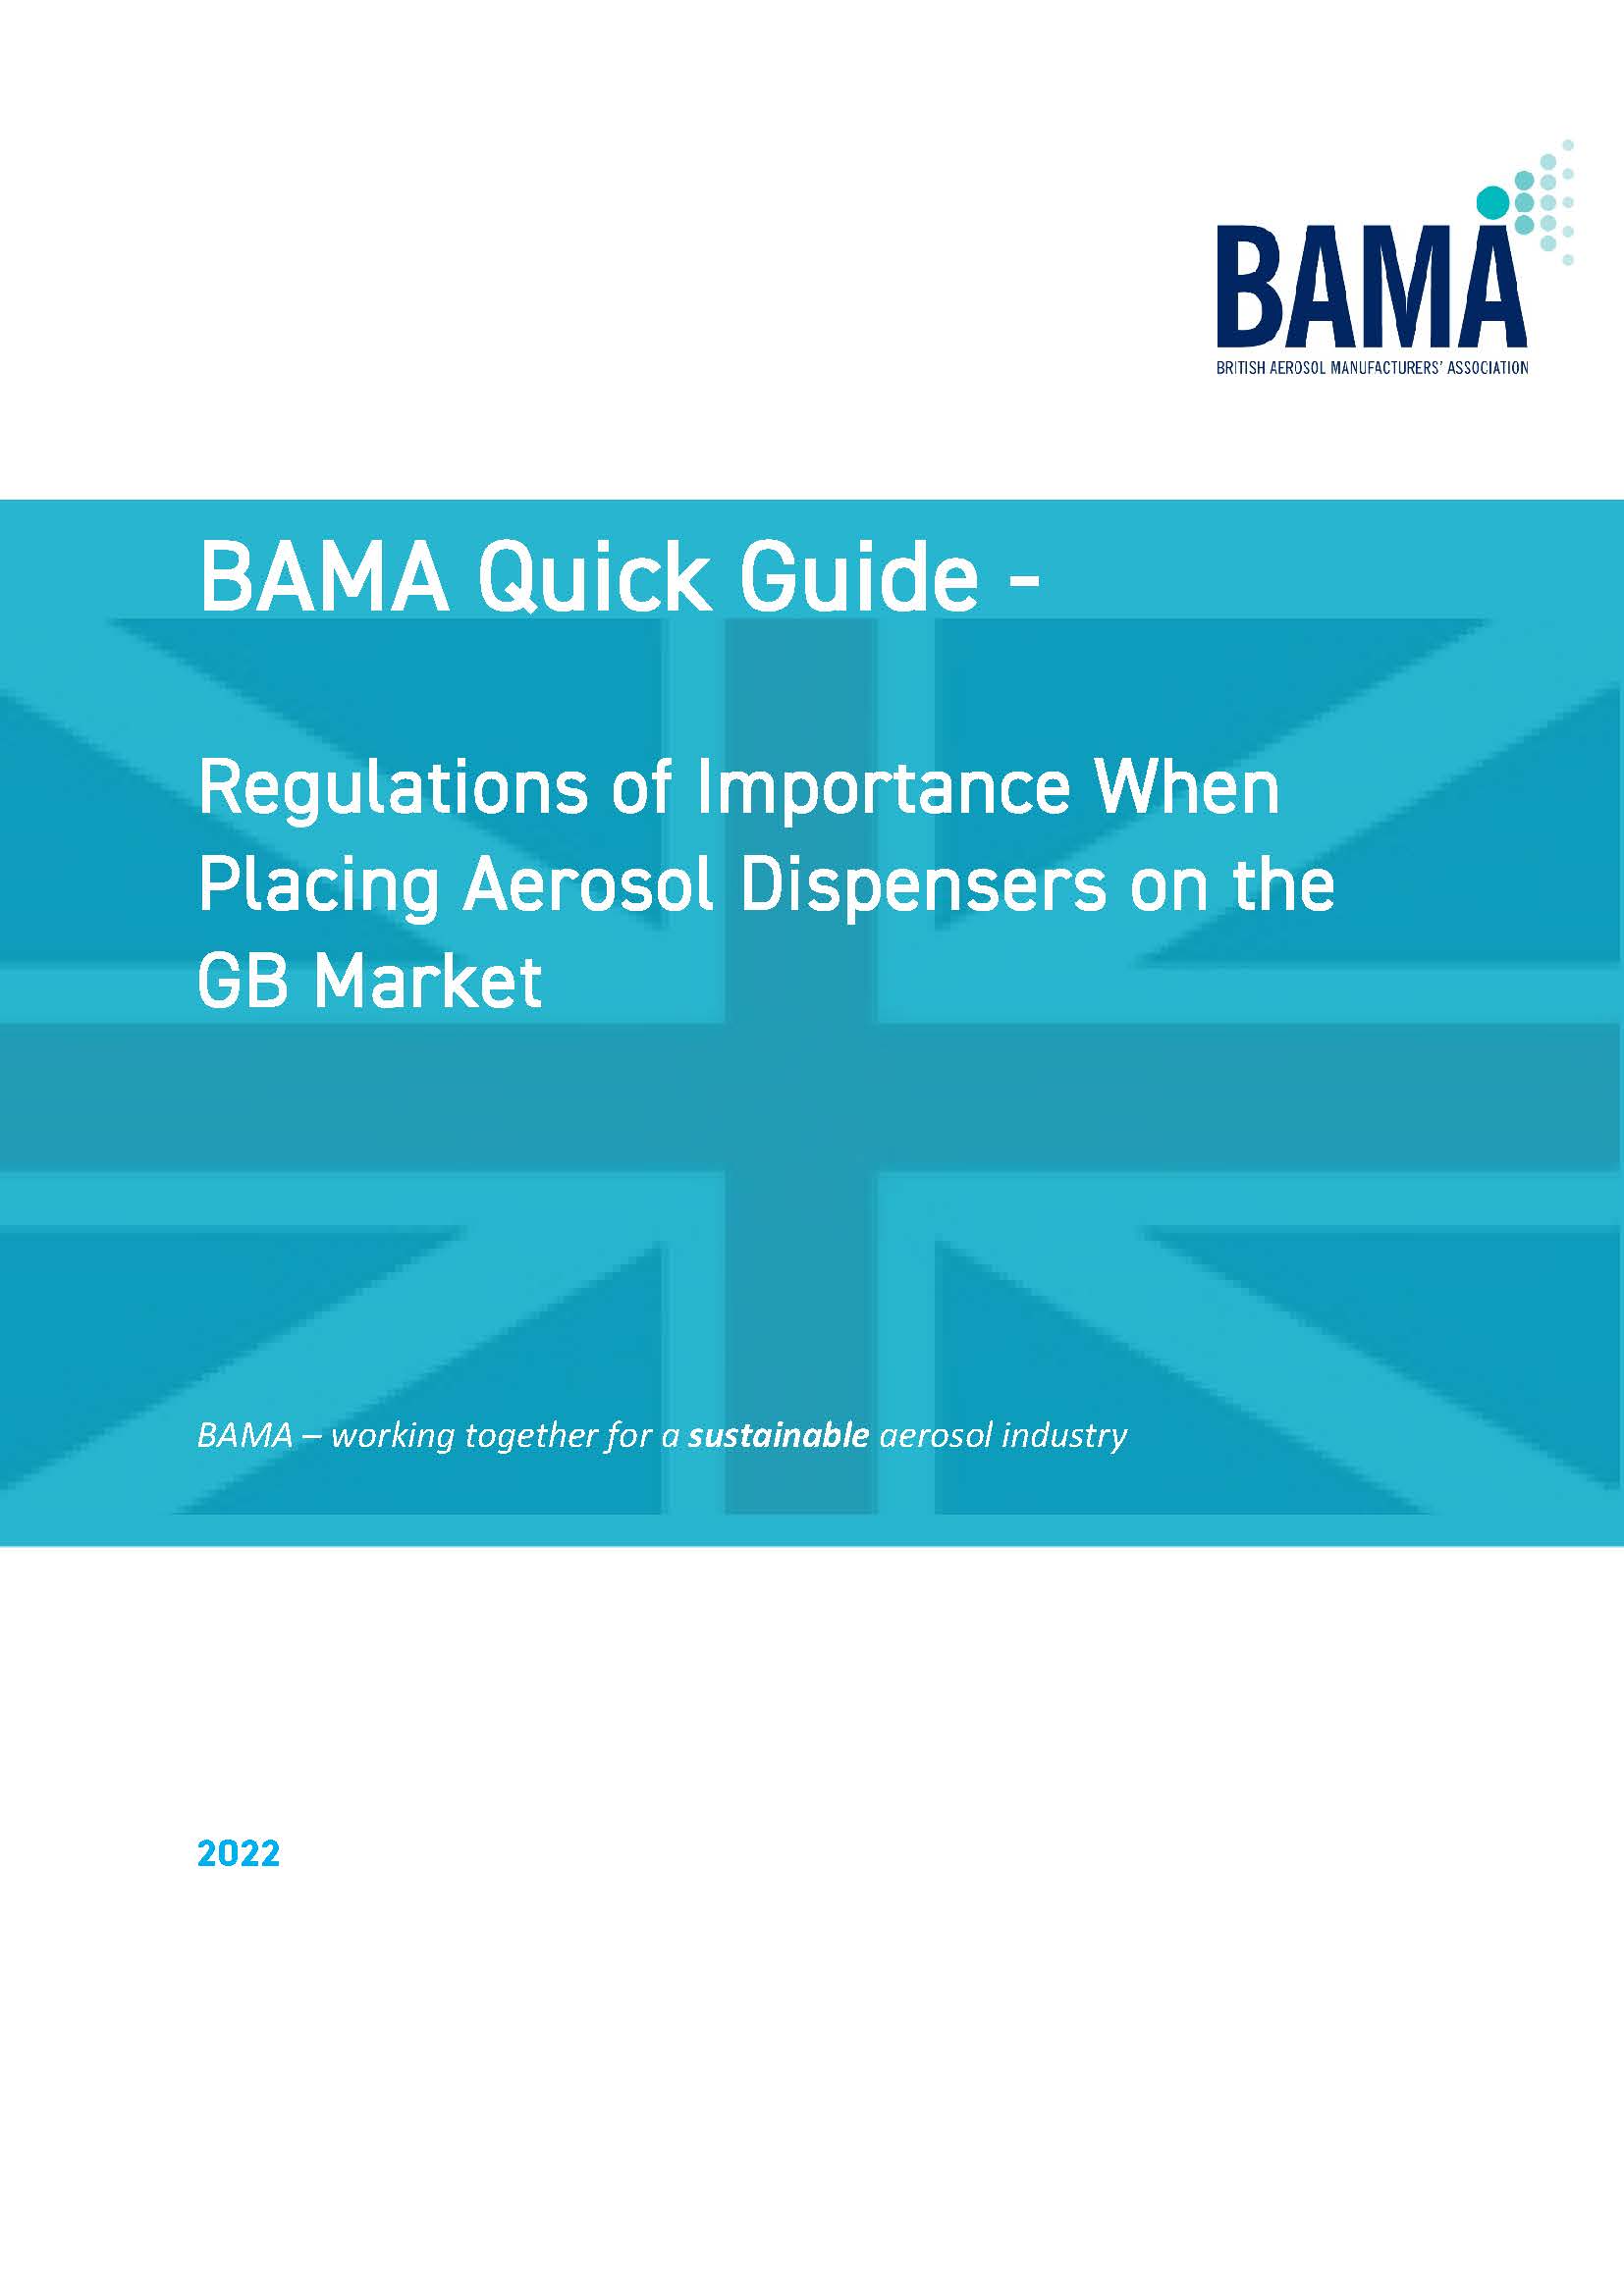 The BAMA Quick Guide to Regulations of Importance when Placing an Aerosol on the GB Market